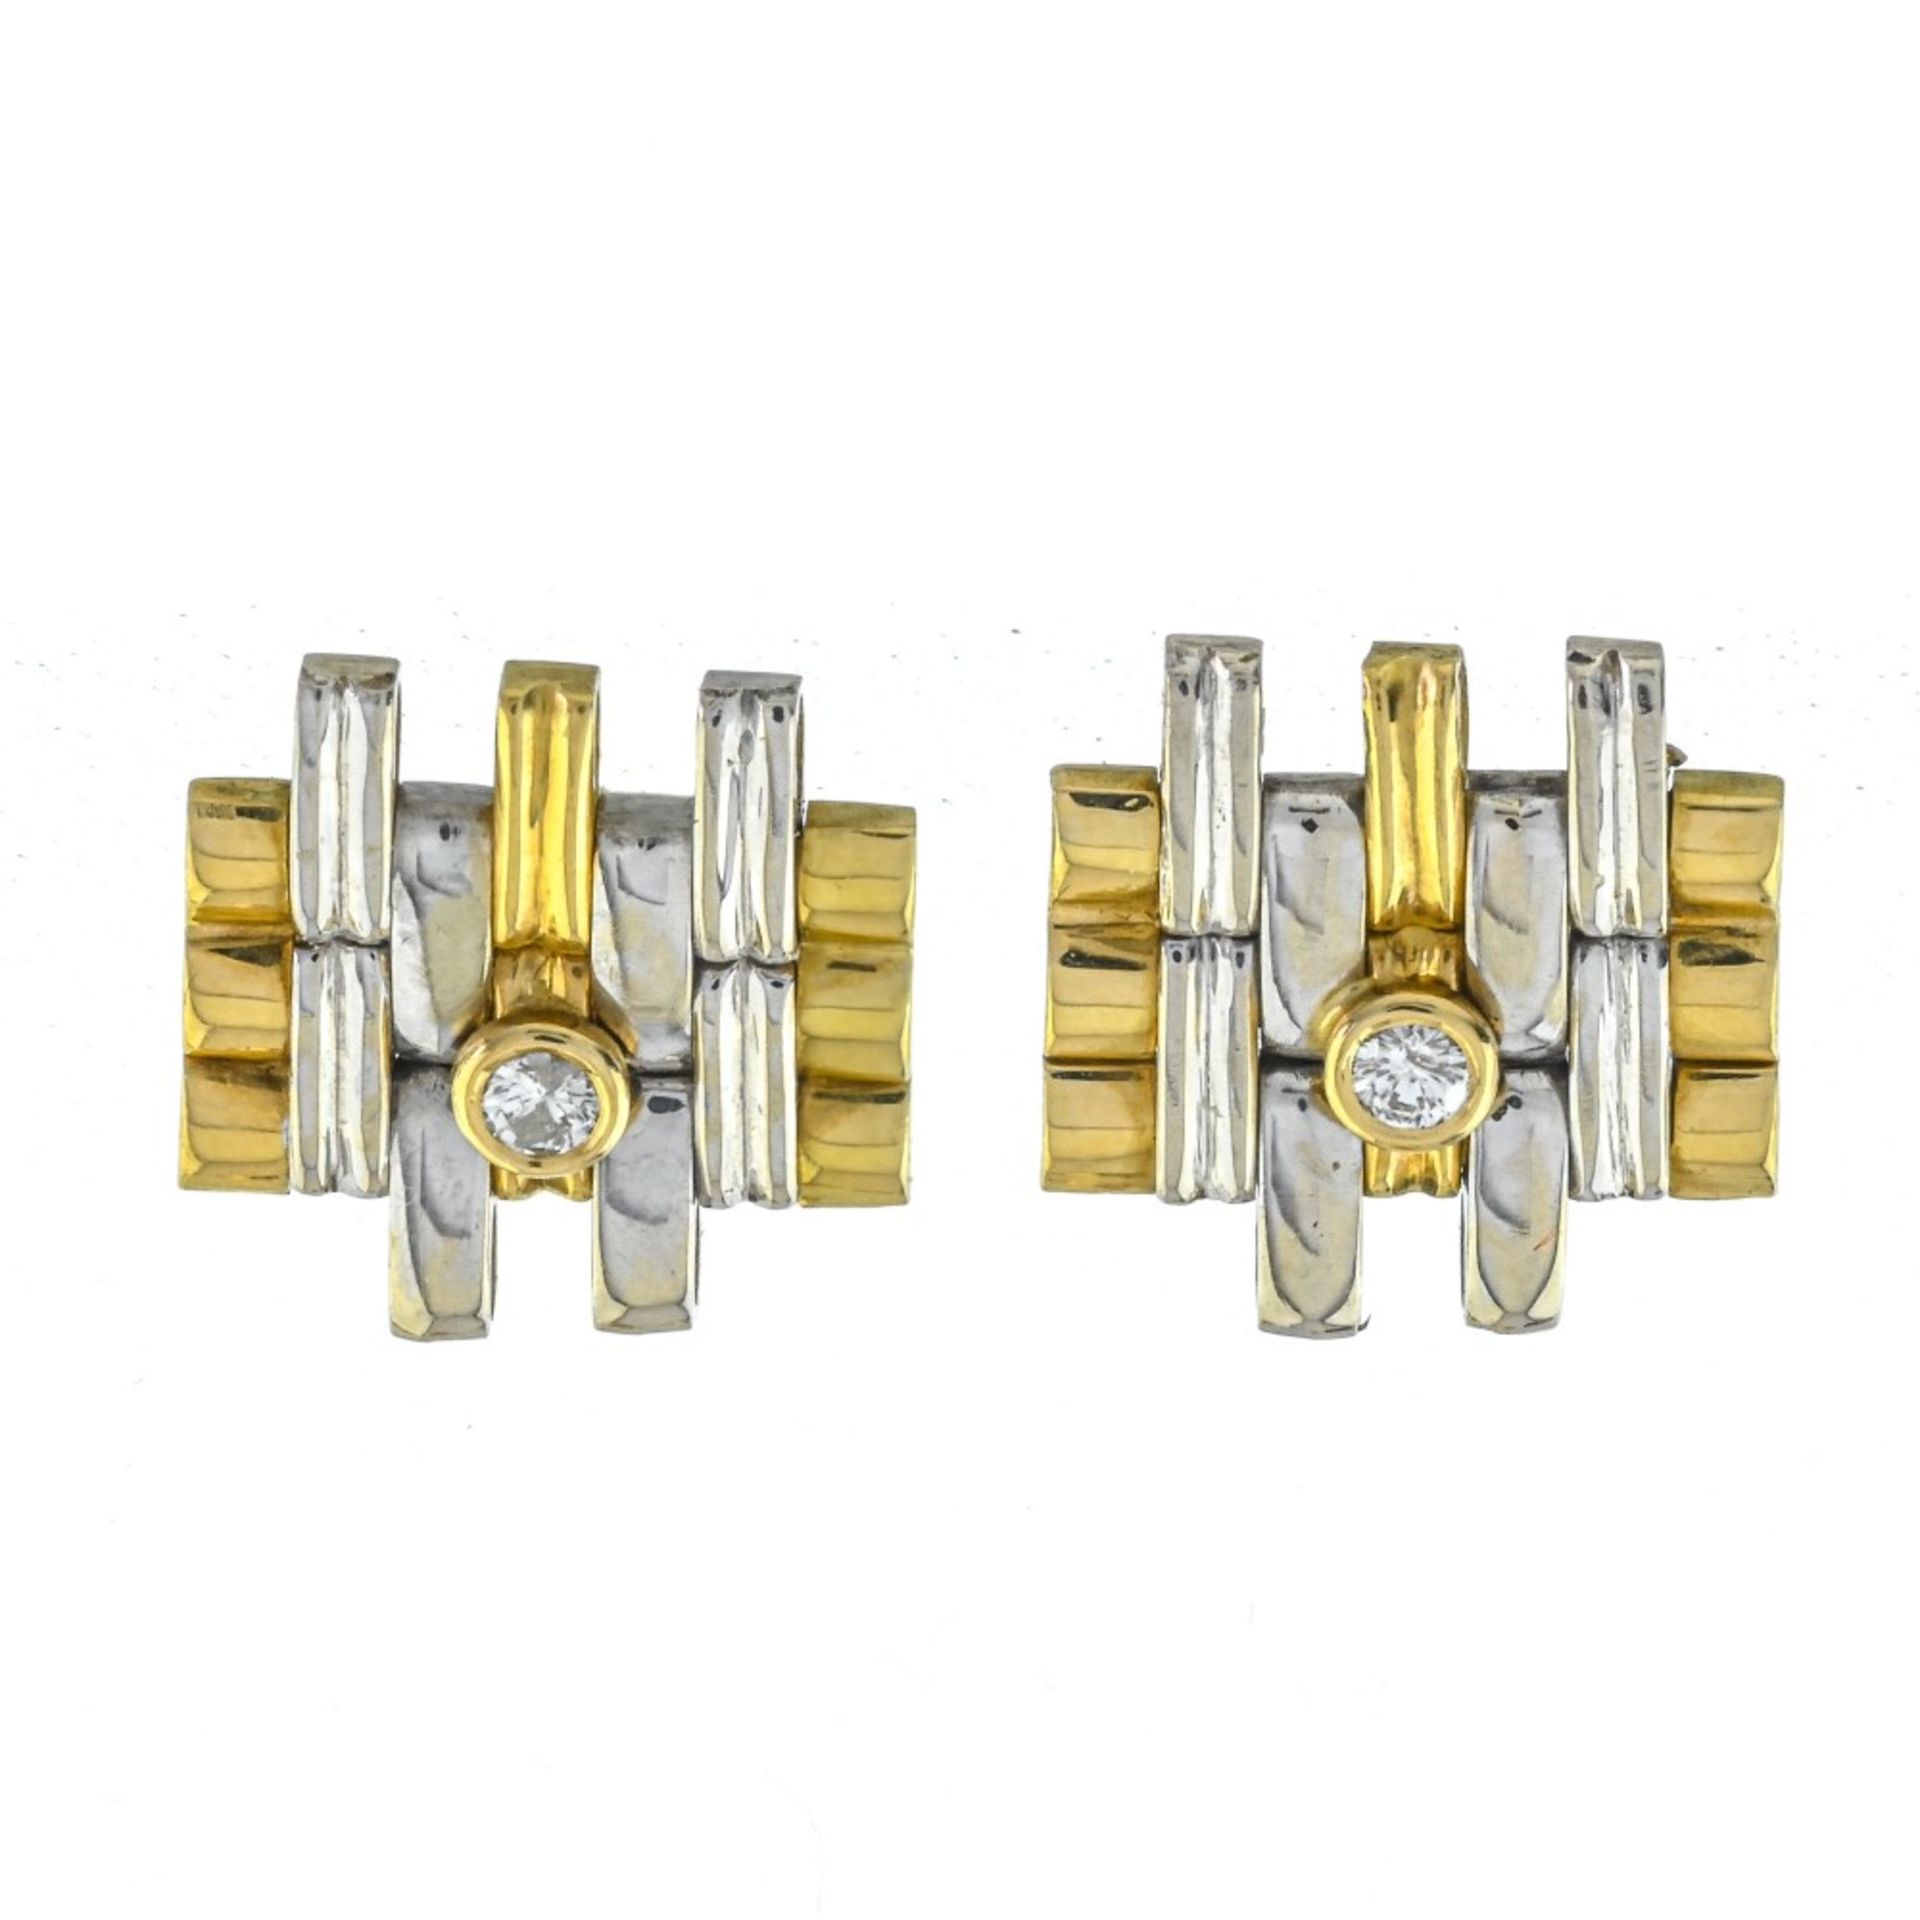 Modernist earrings 14 Karat gold, yellow and white gold wires intertwined to form a geometric